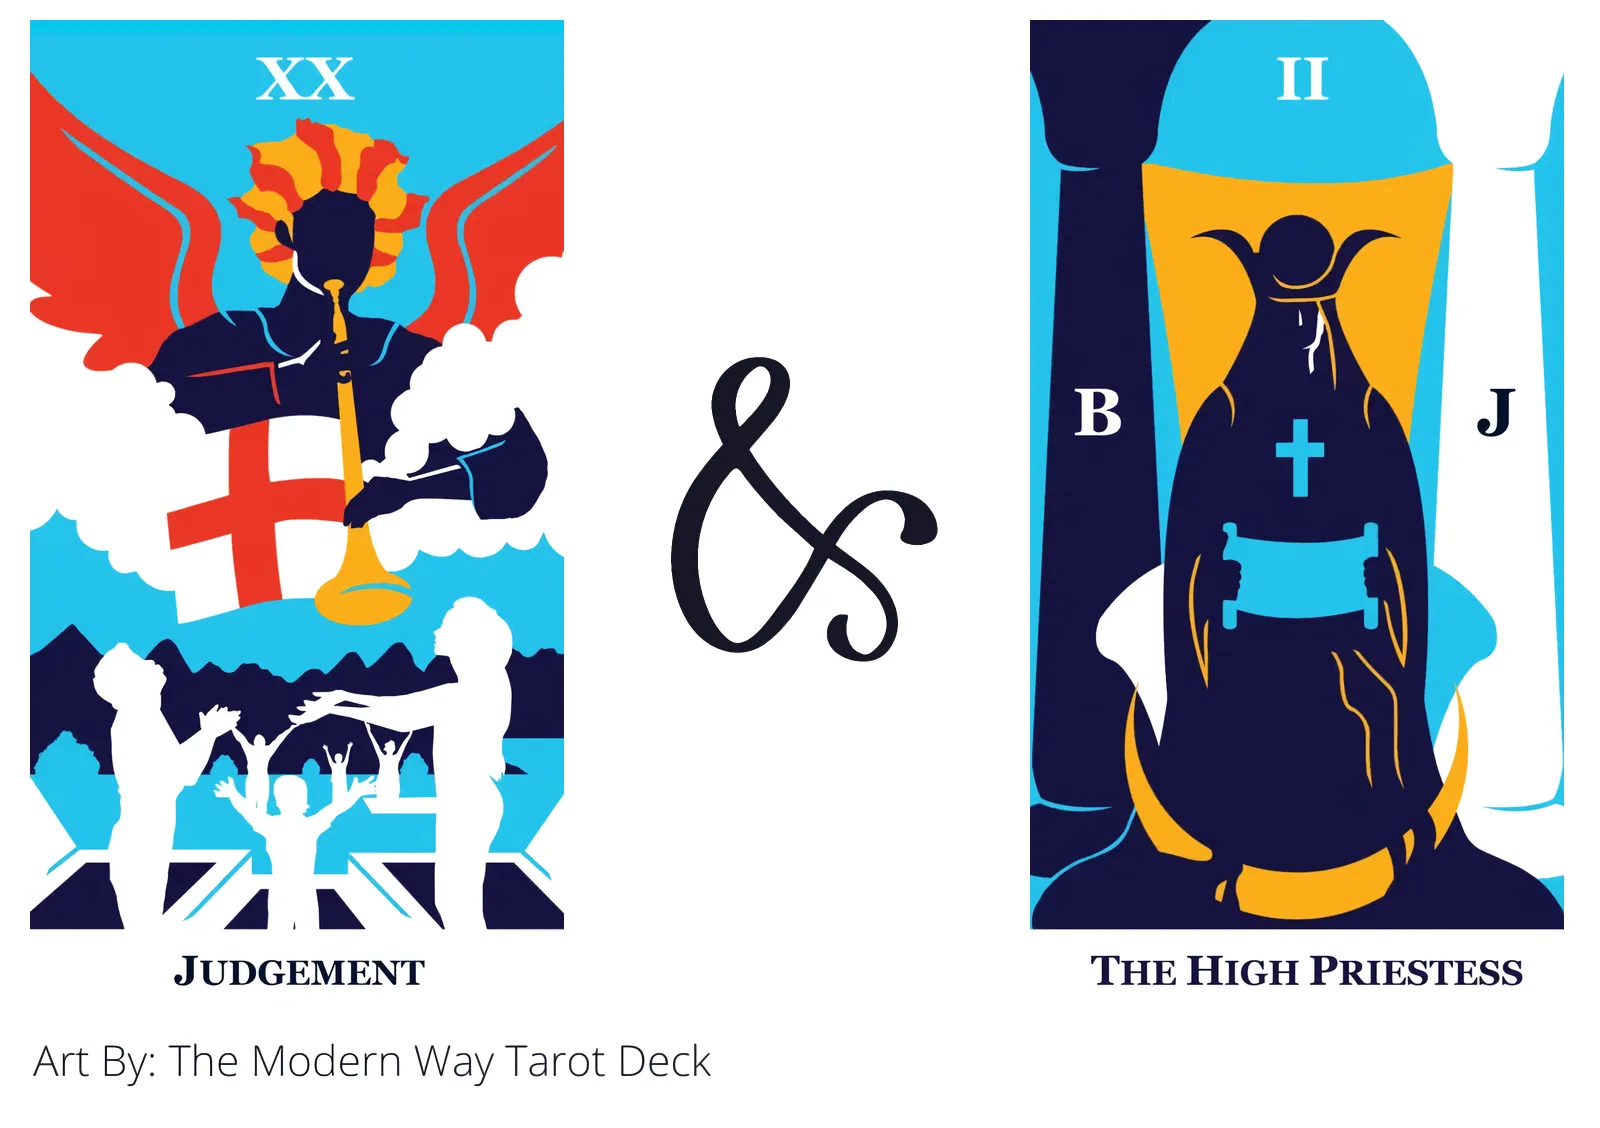 judgement and the high priestess tarot cards together